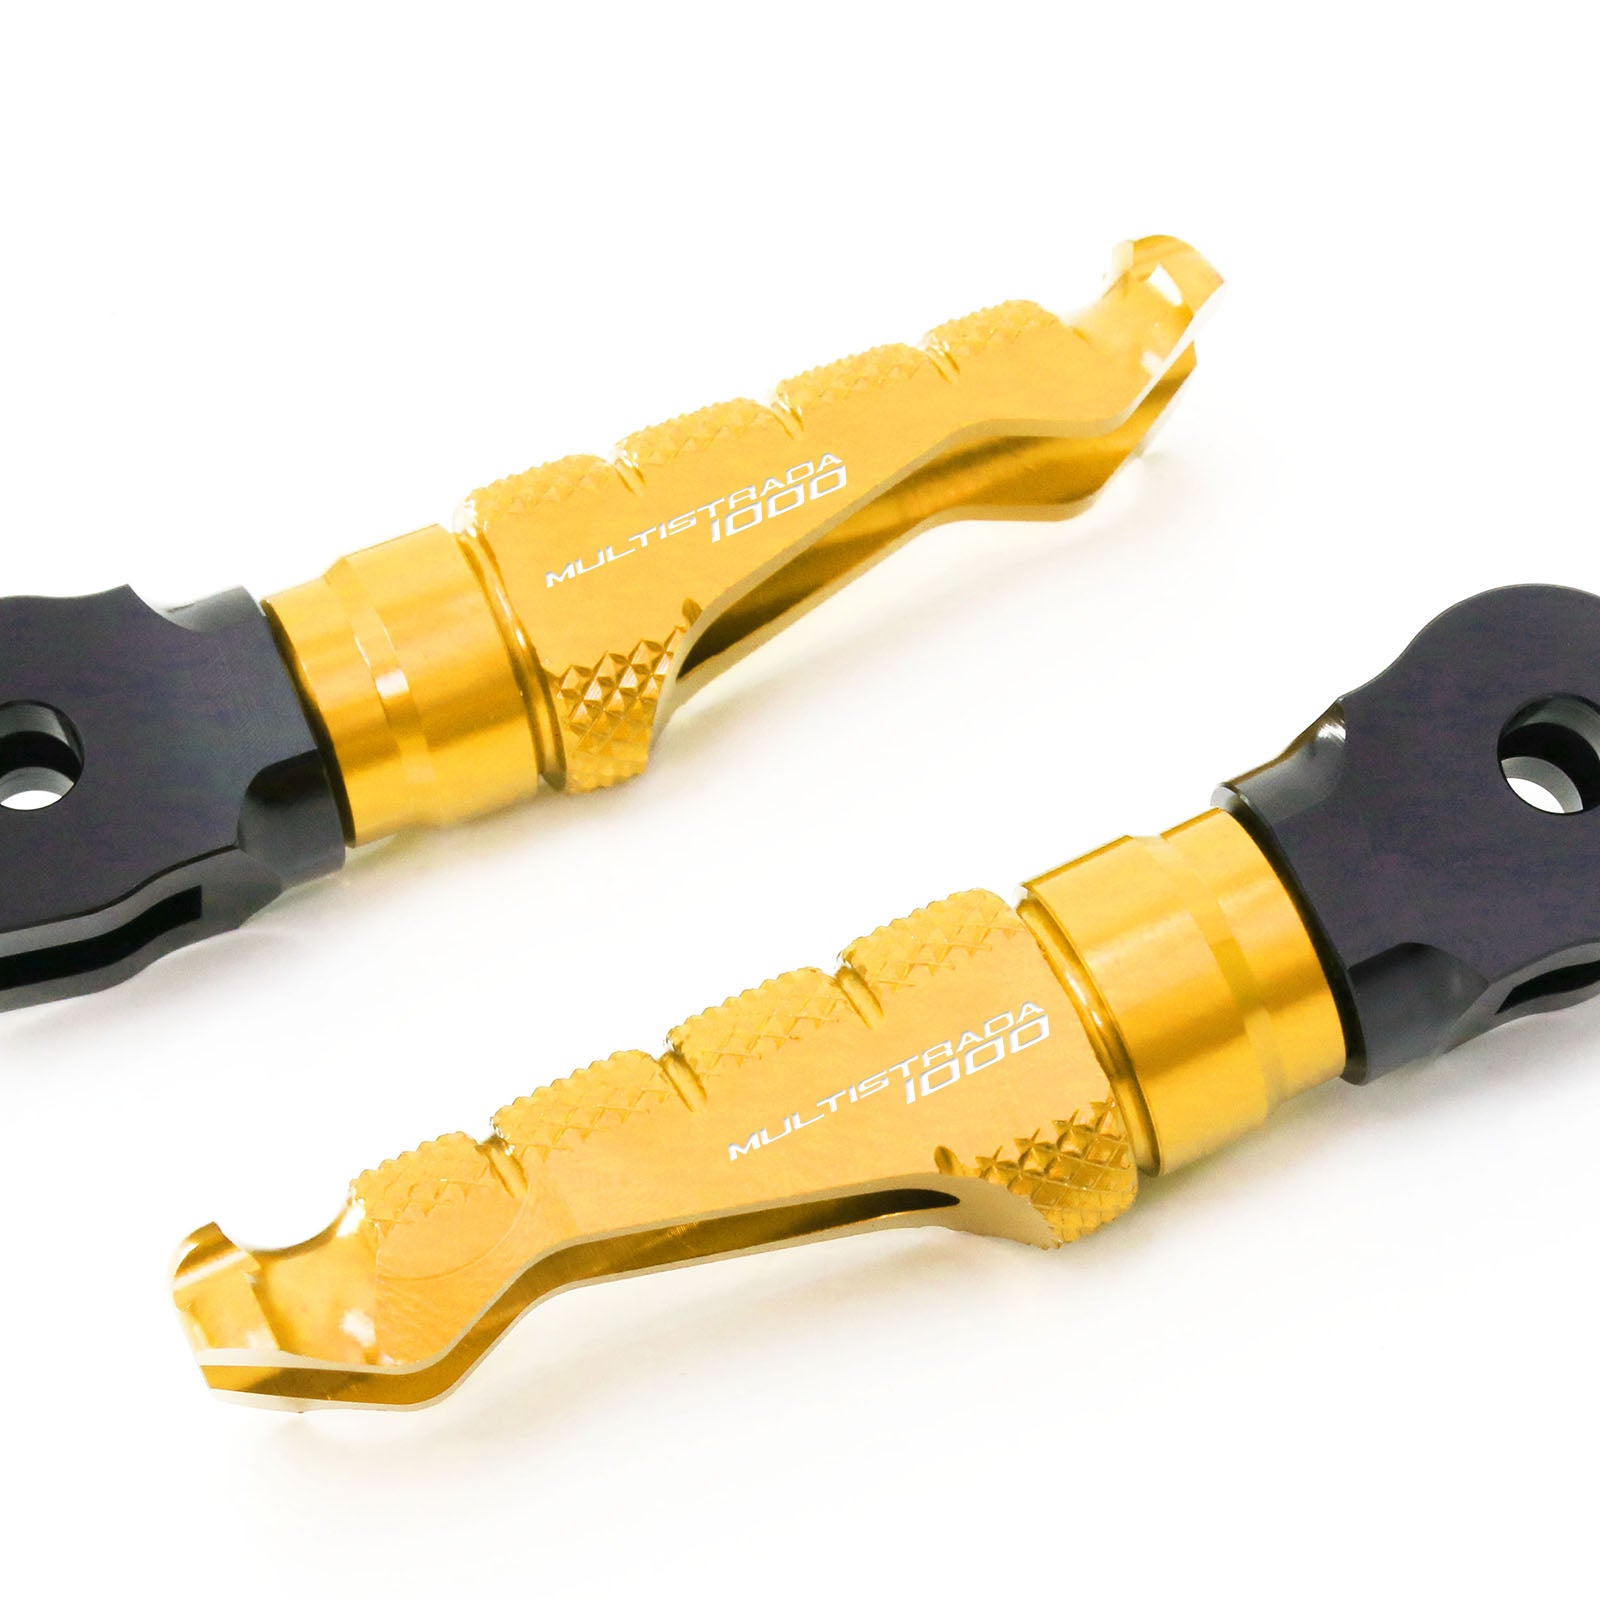 Ducati Multistrada 1000 engraved front rider Gold Foot Pegs